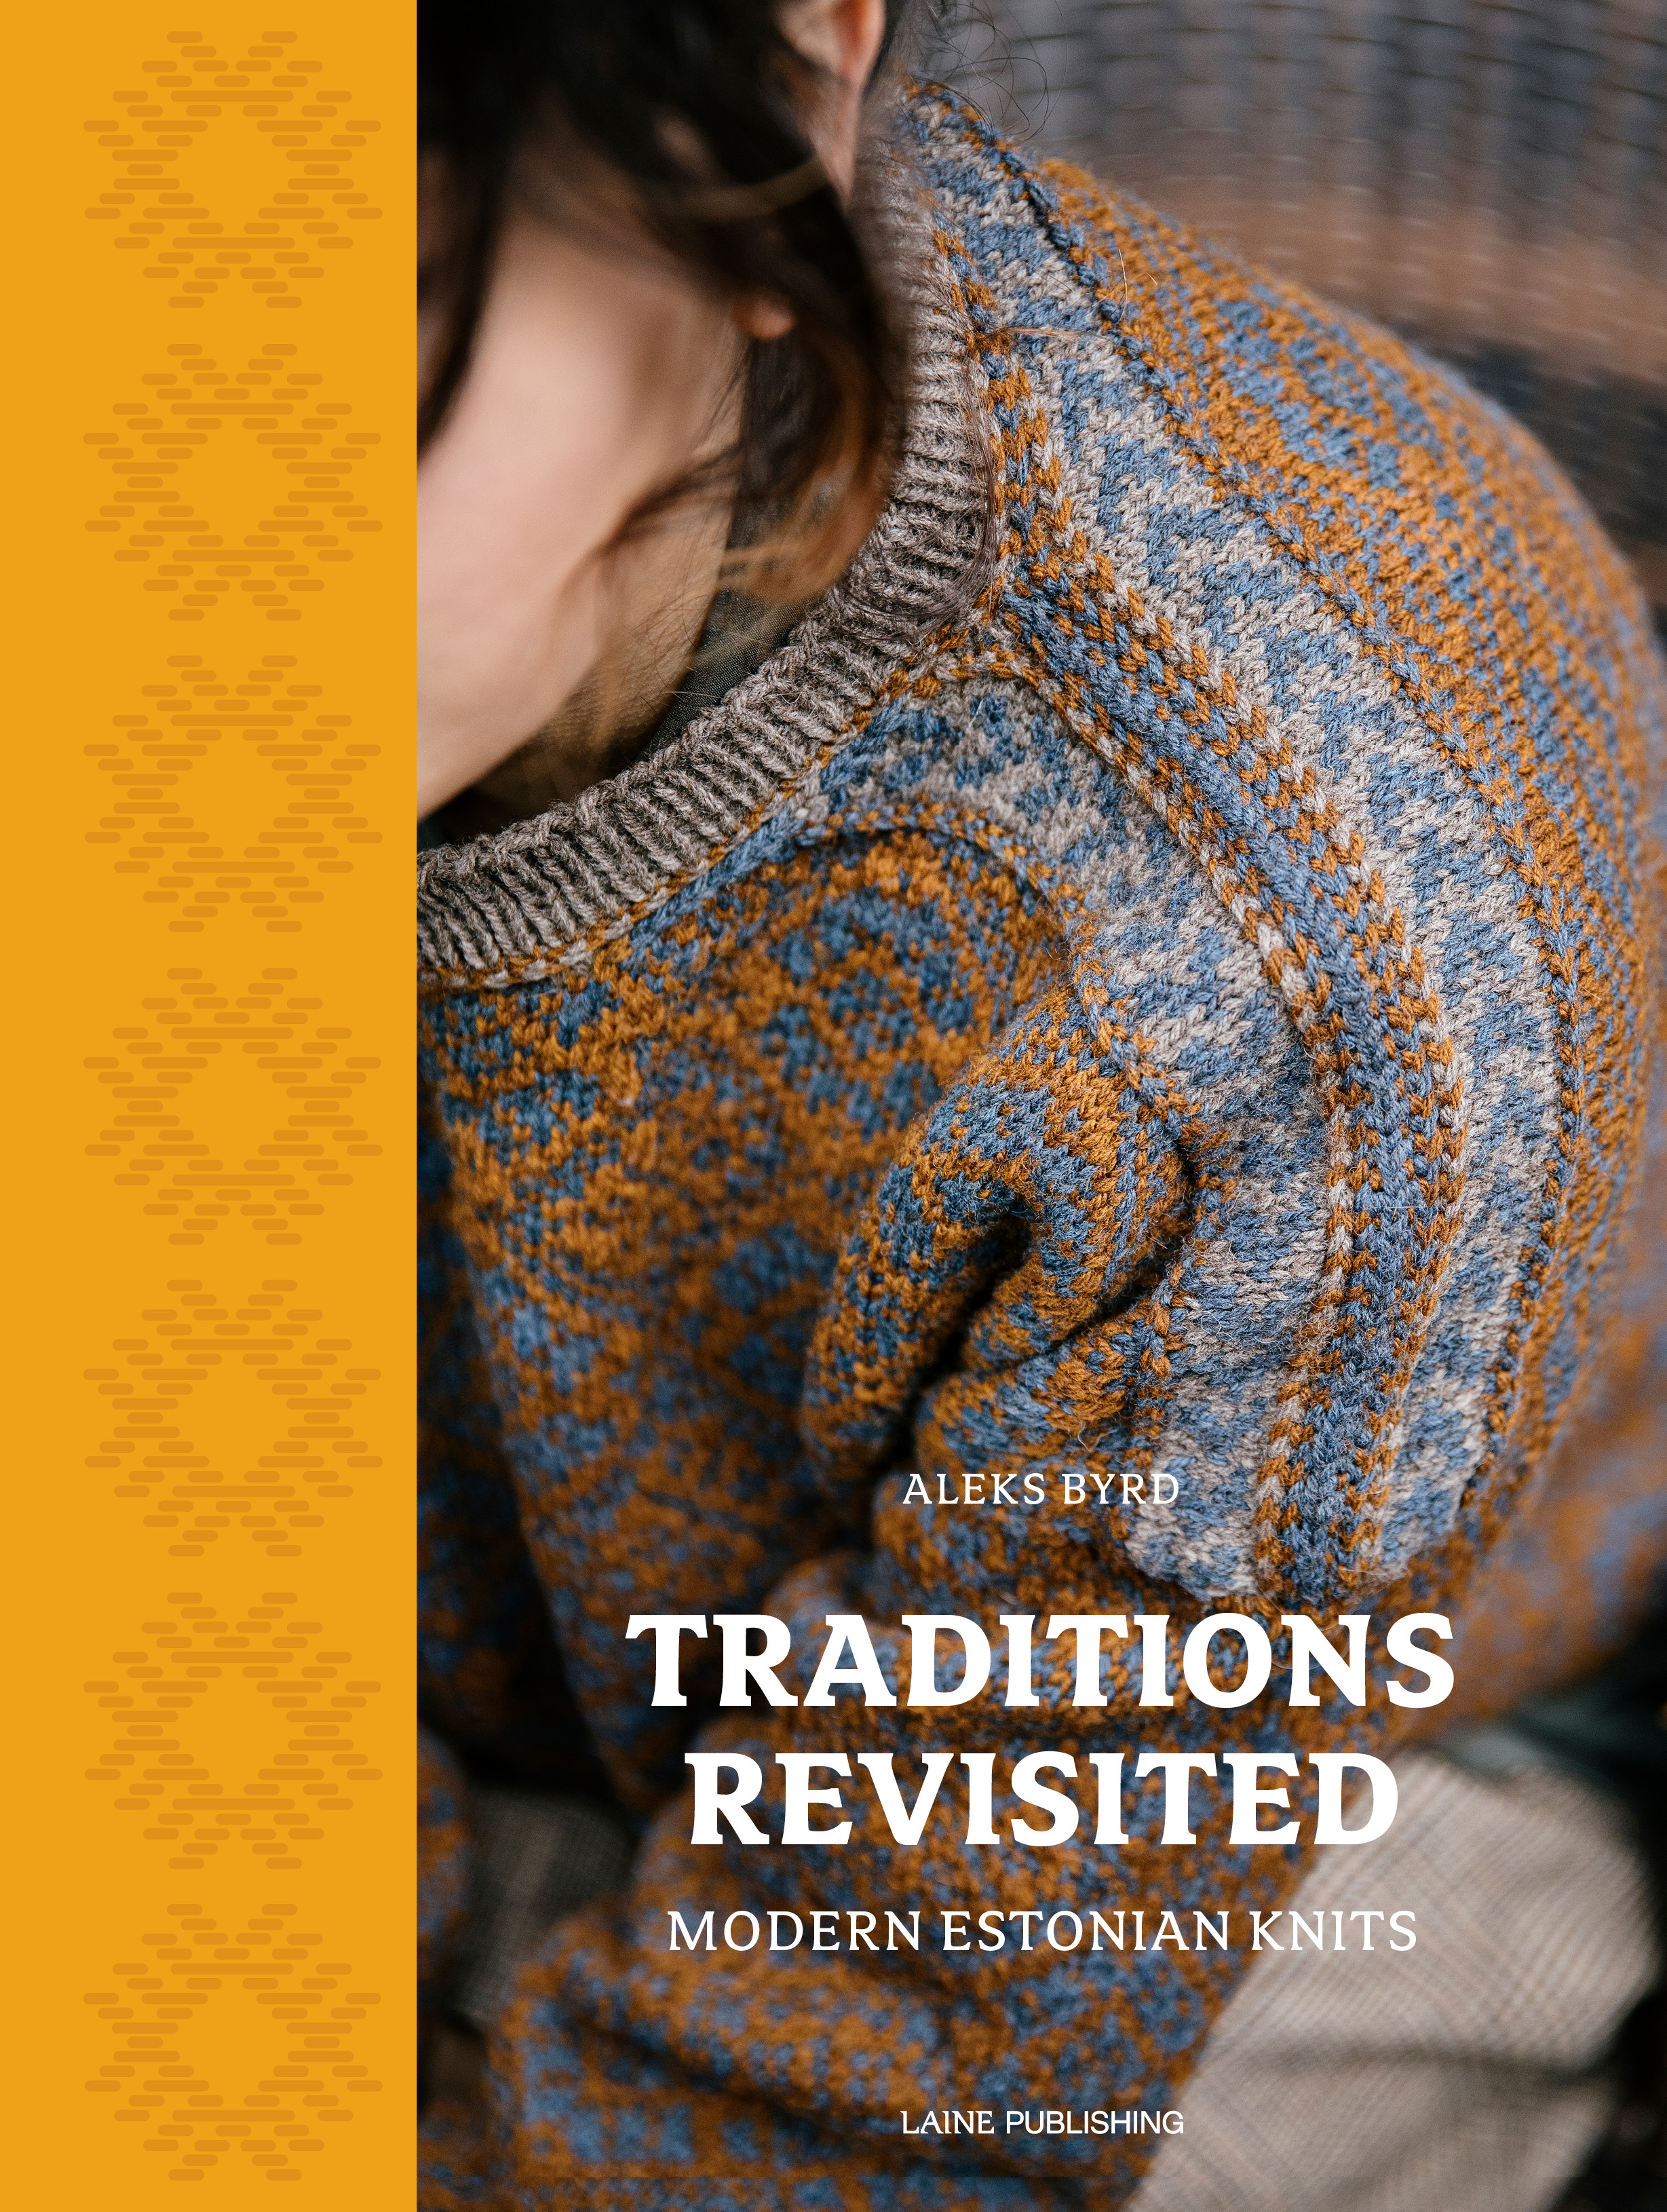 Aleks Byrd, &bdquo;Traditions Revisited&ldquo;, Englisch